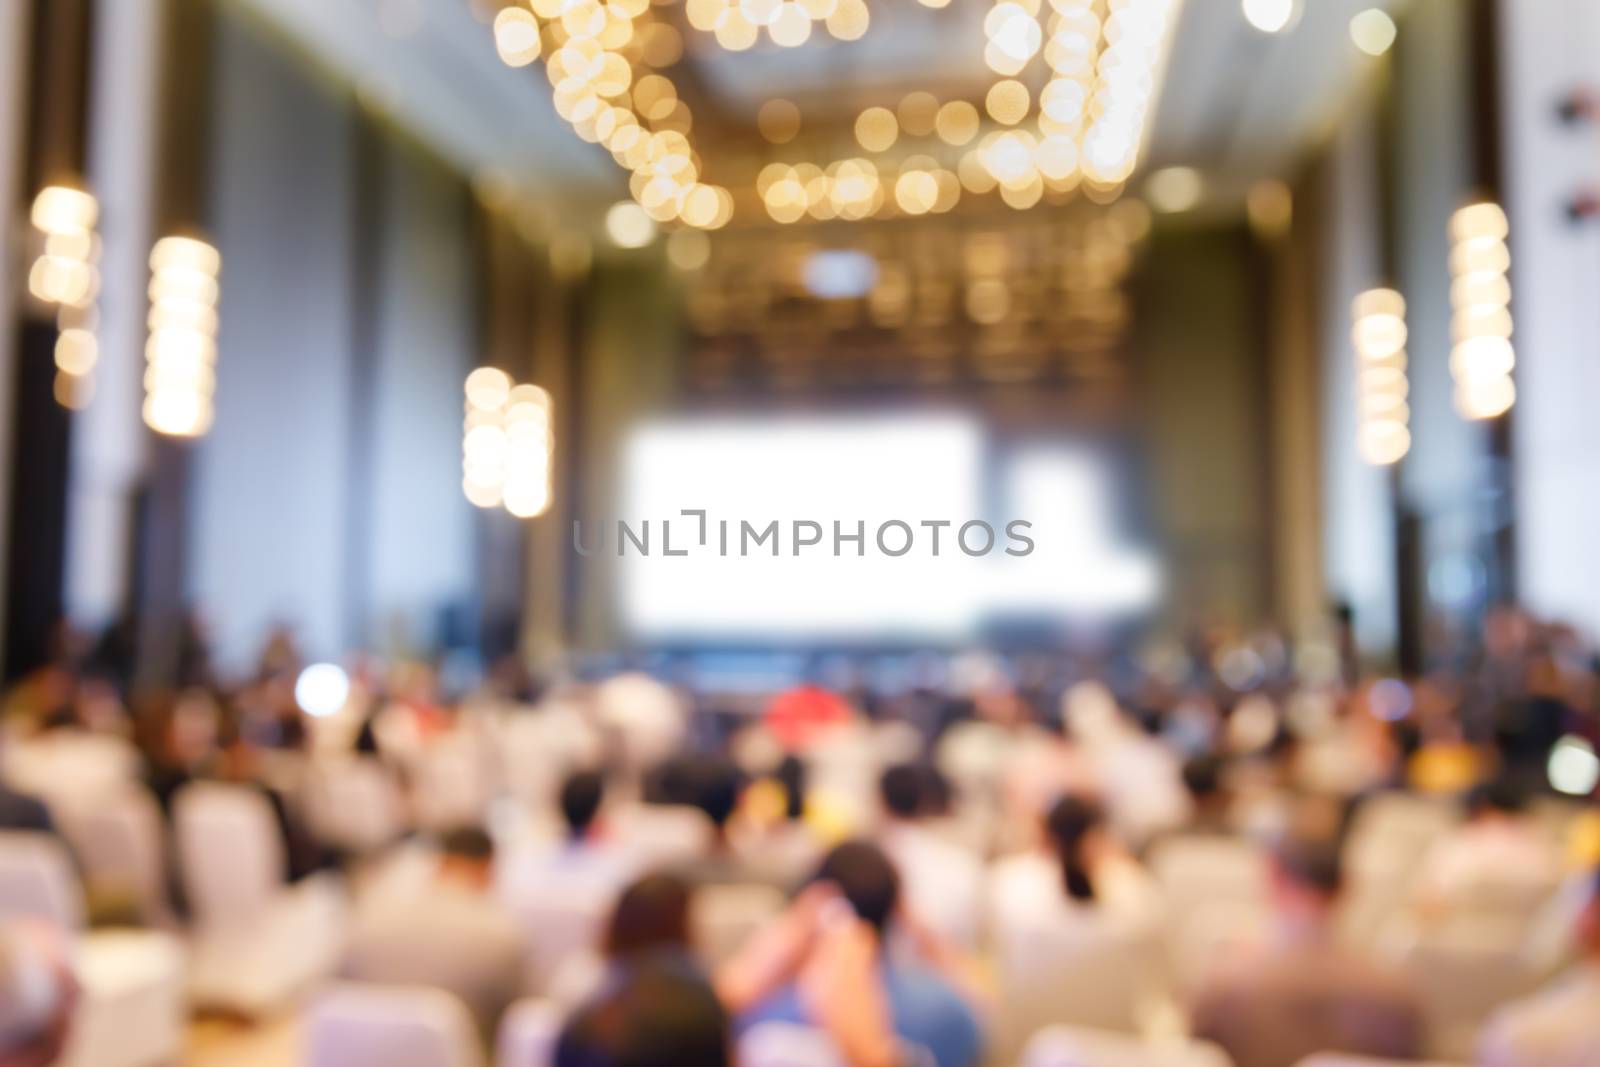 Abstract blur audience people in press conference event or corporate seminar meeting